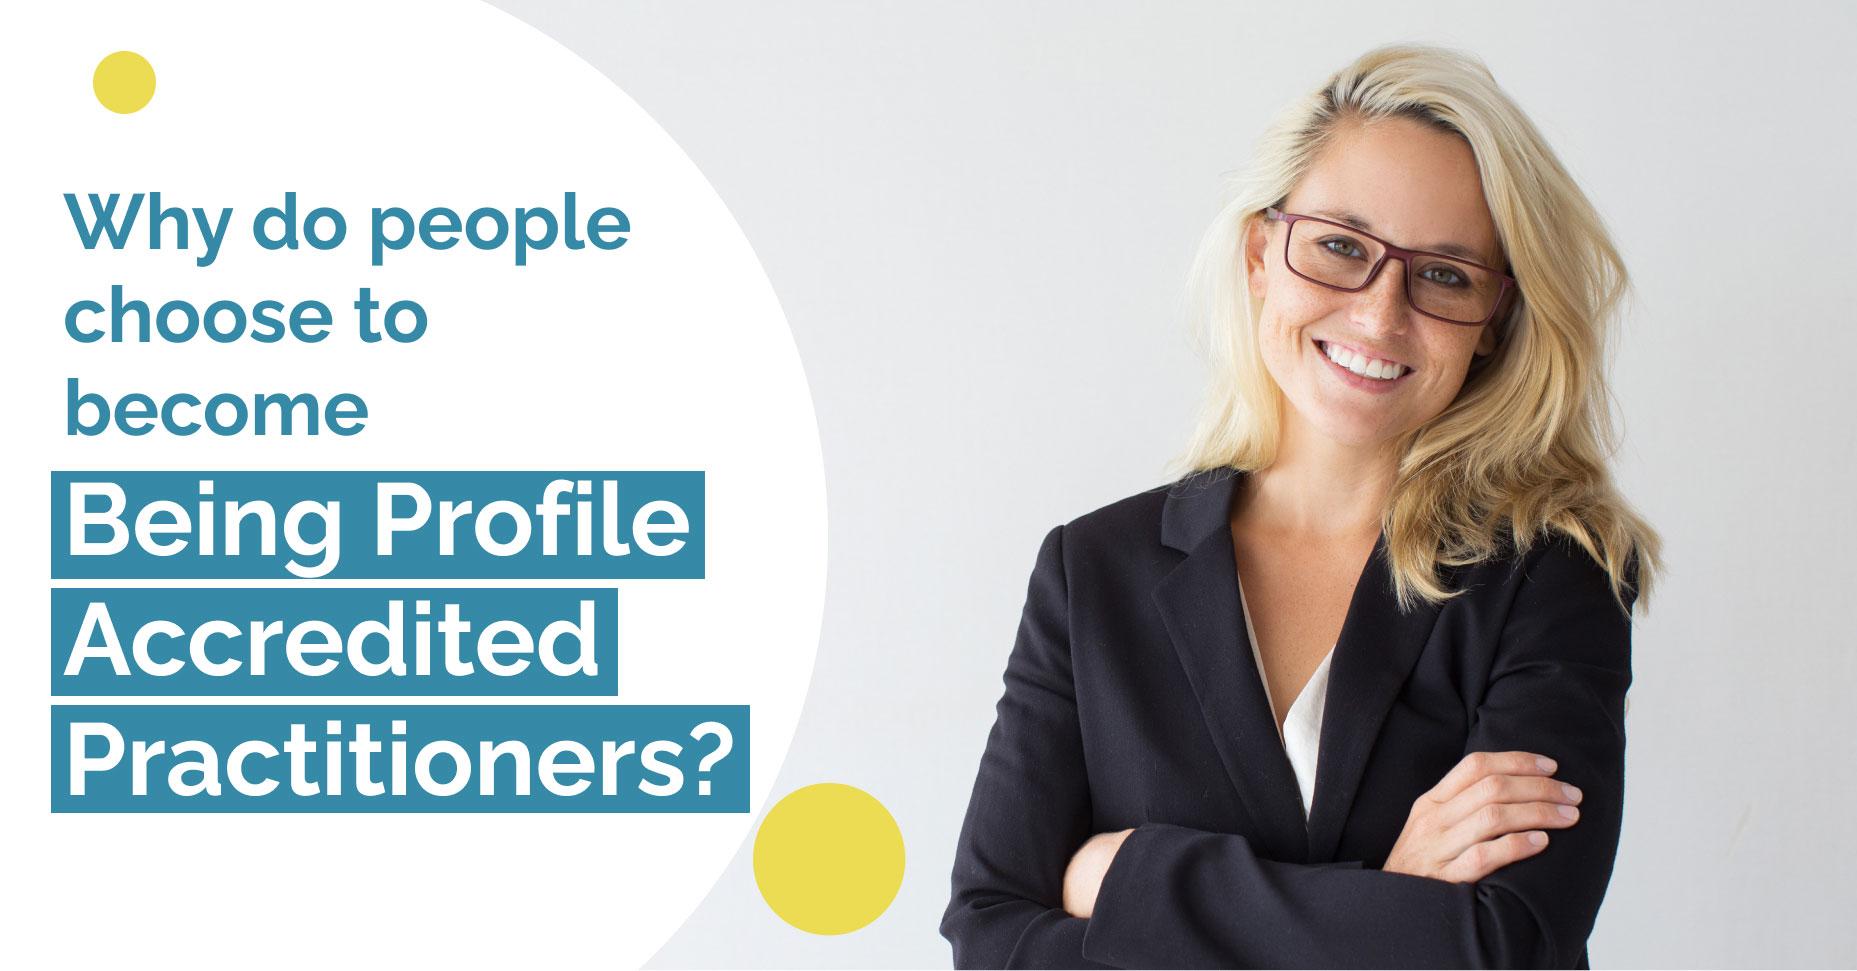 Why do people choose to become Being Profile Accredited Practitioners?